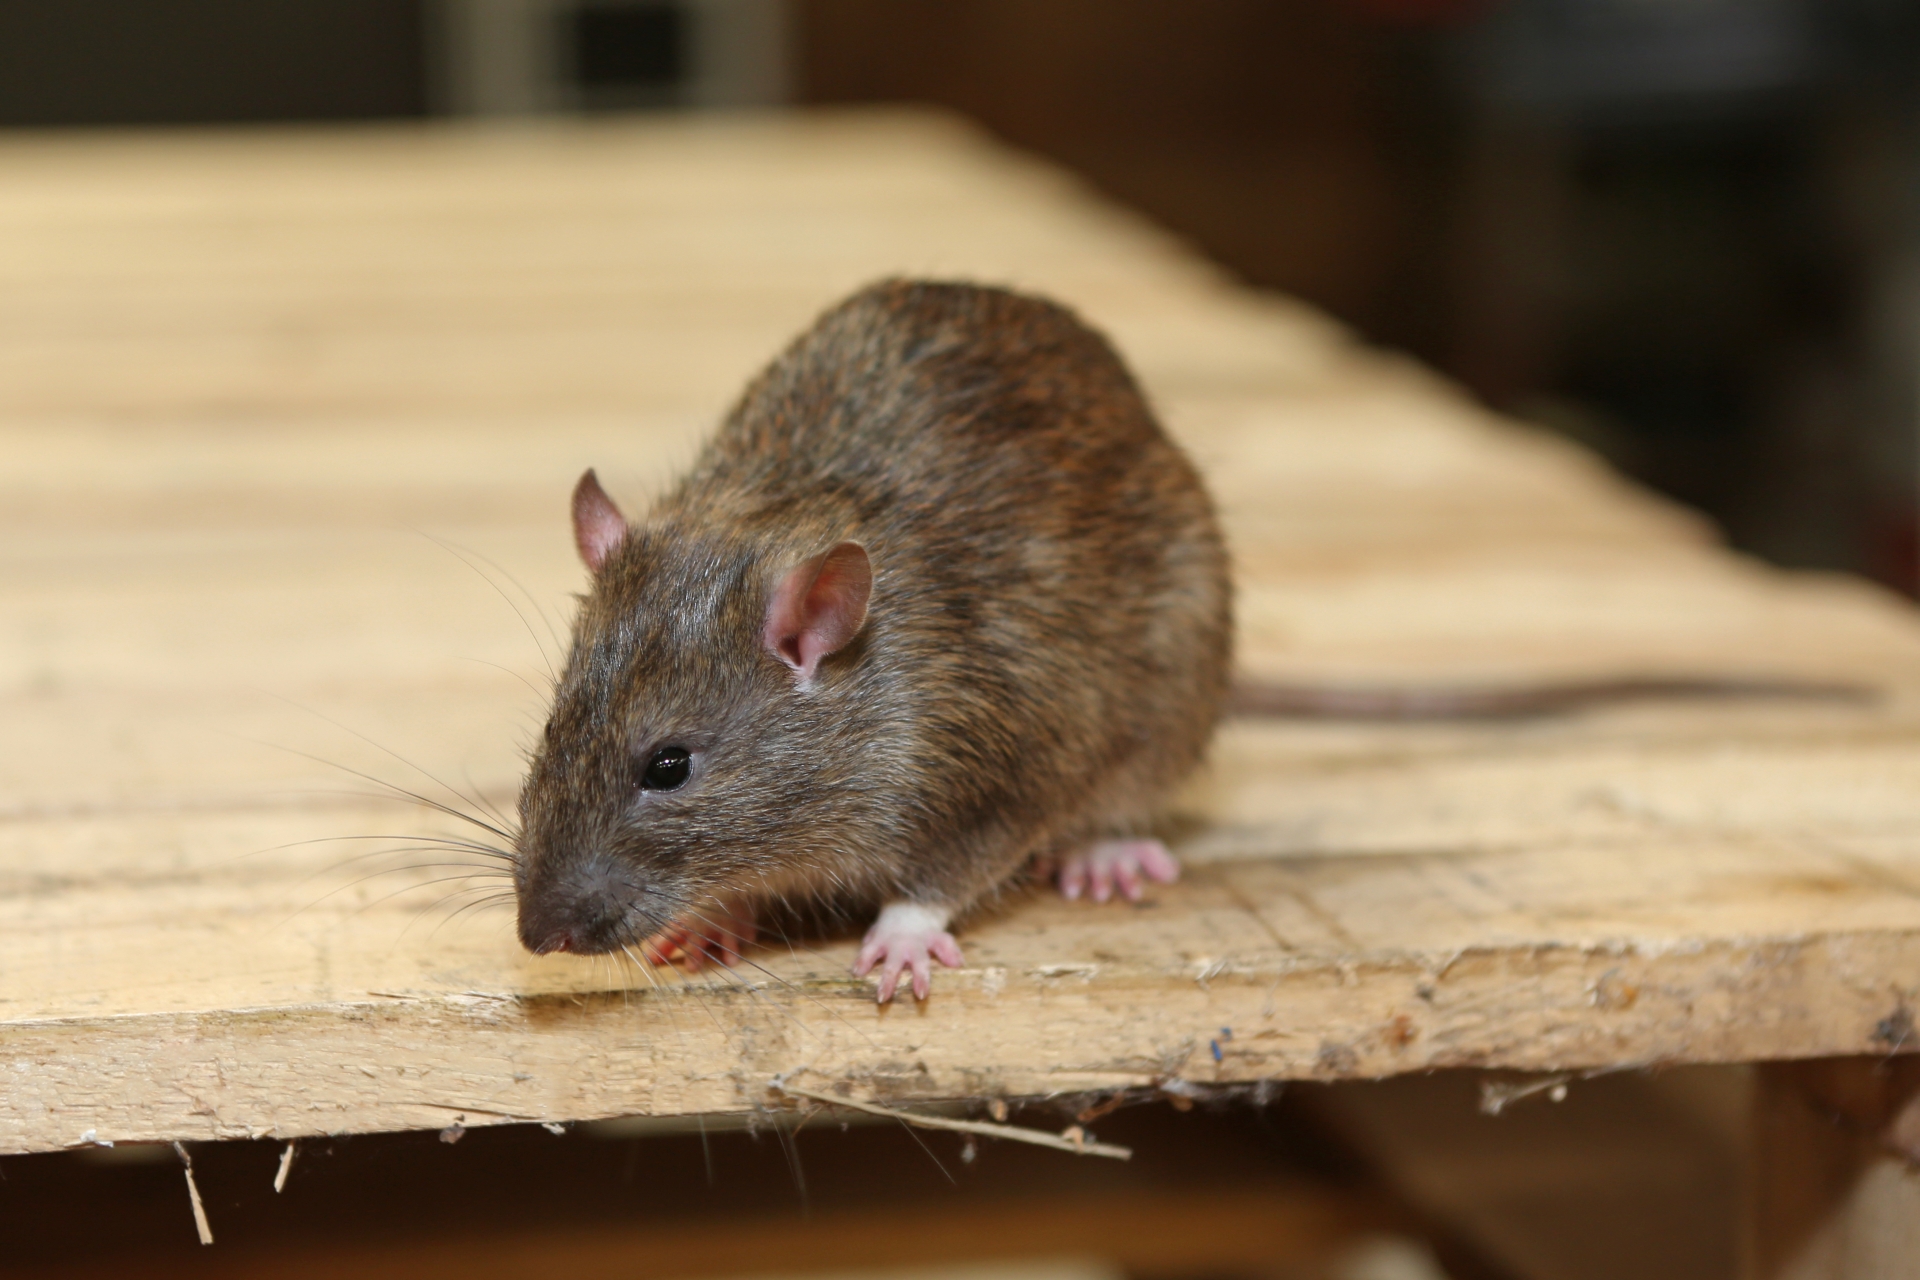 Rat extermination, Pest Control in Crouch End, N8. Call Now 020 8166 9746